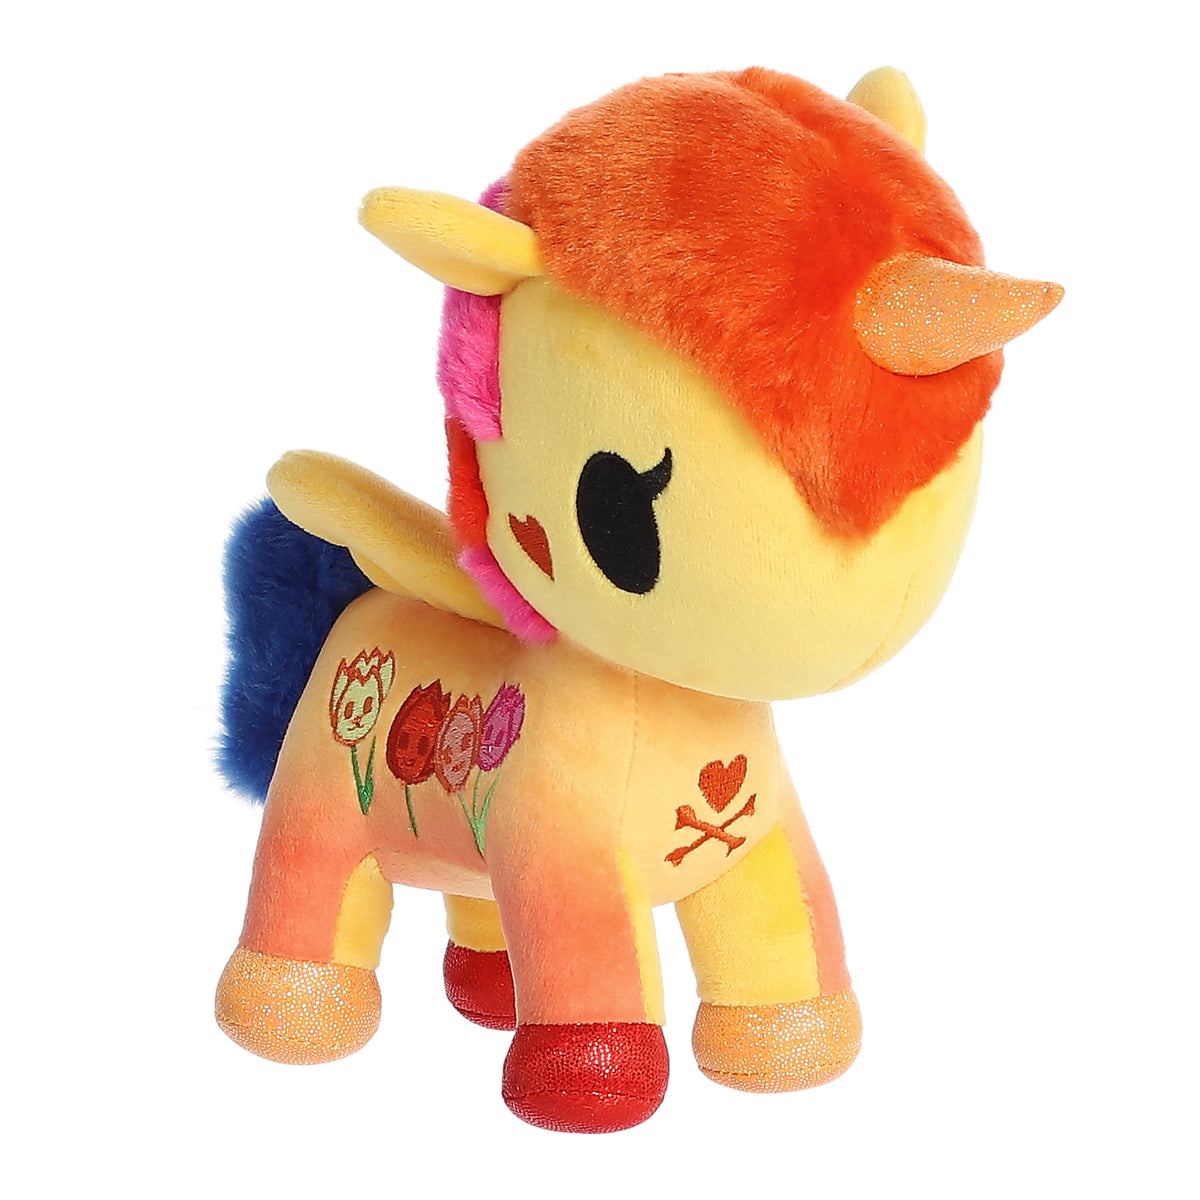 A blazing yellow and orange unicorn plush with four detailed embroidered tulips on its side.